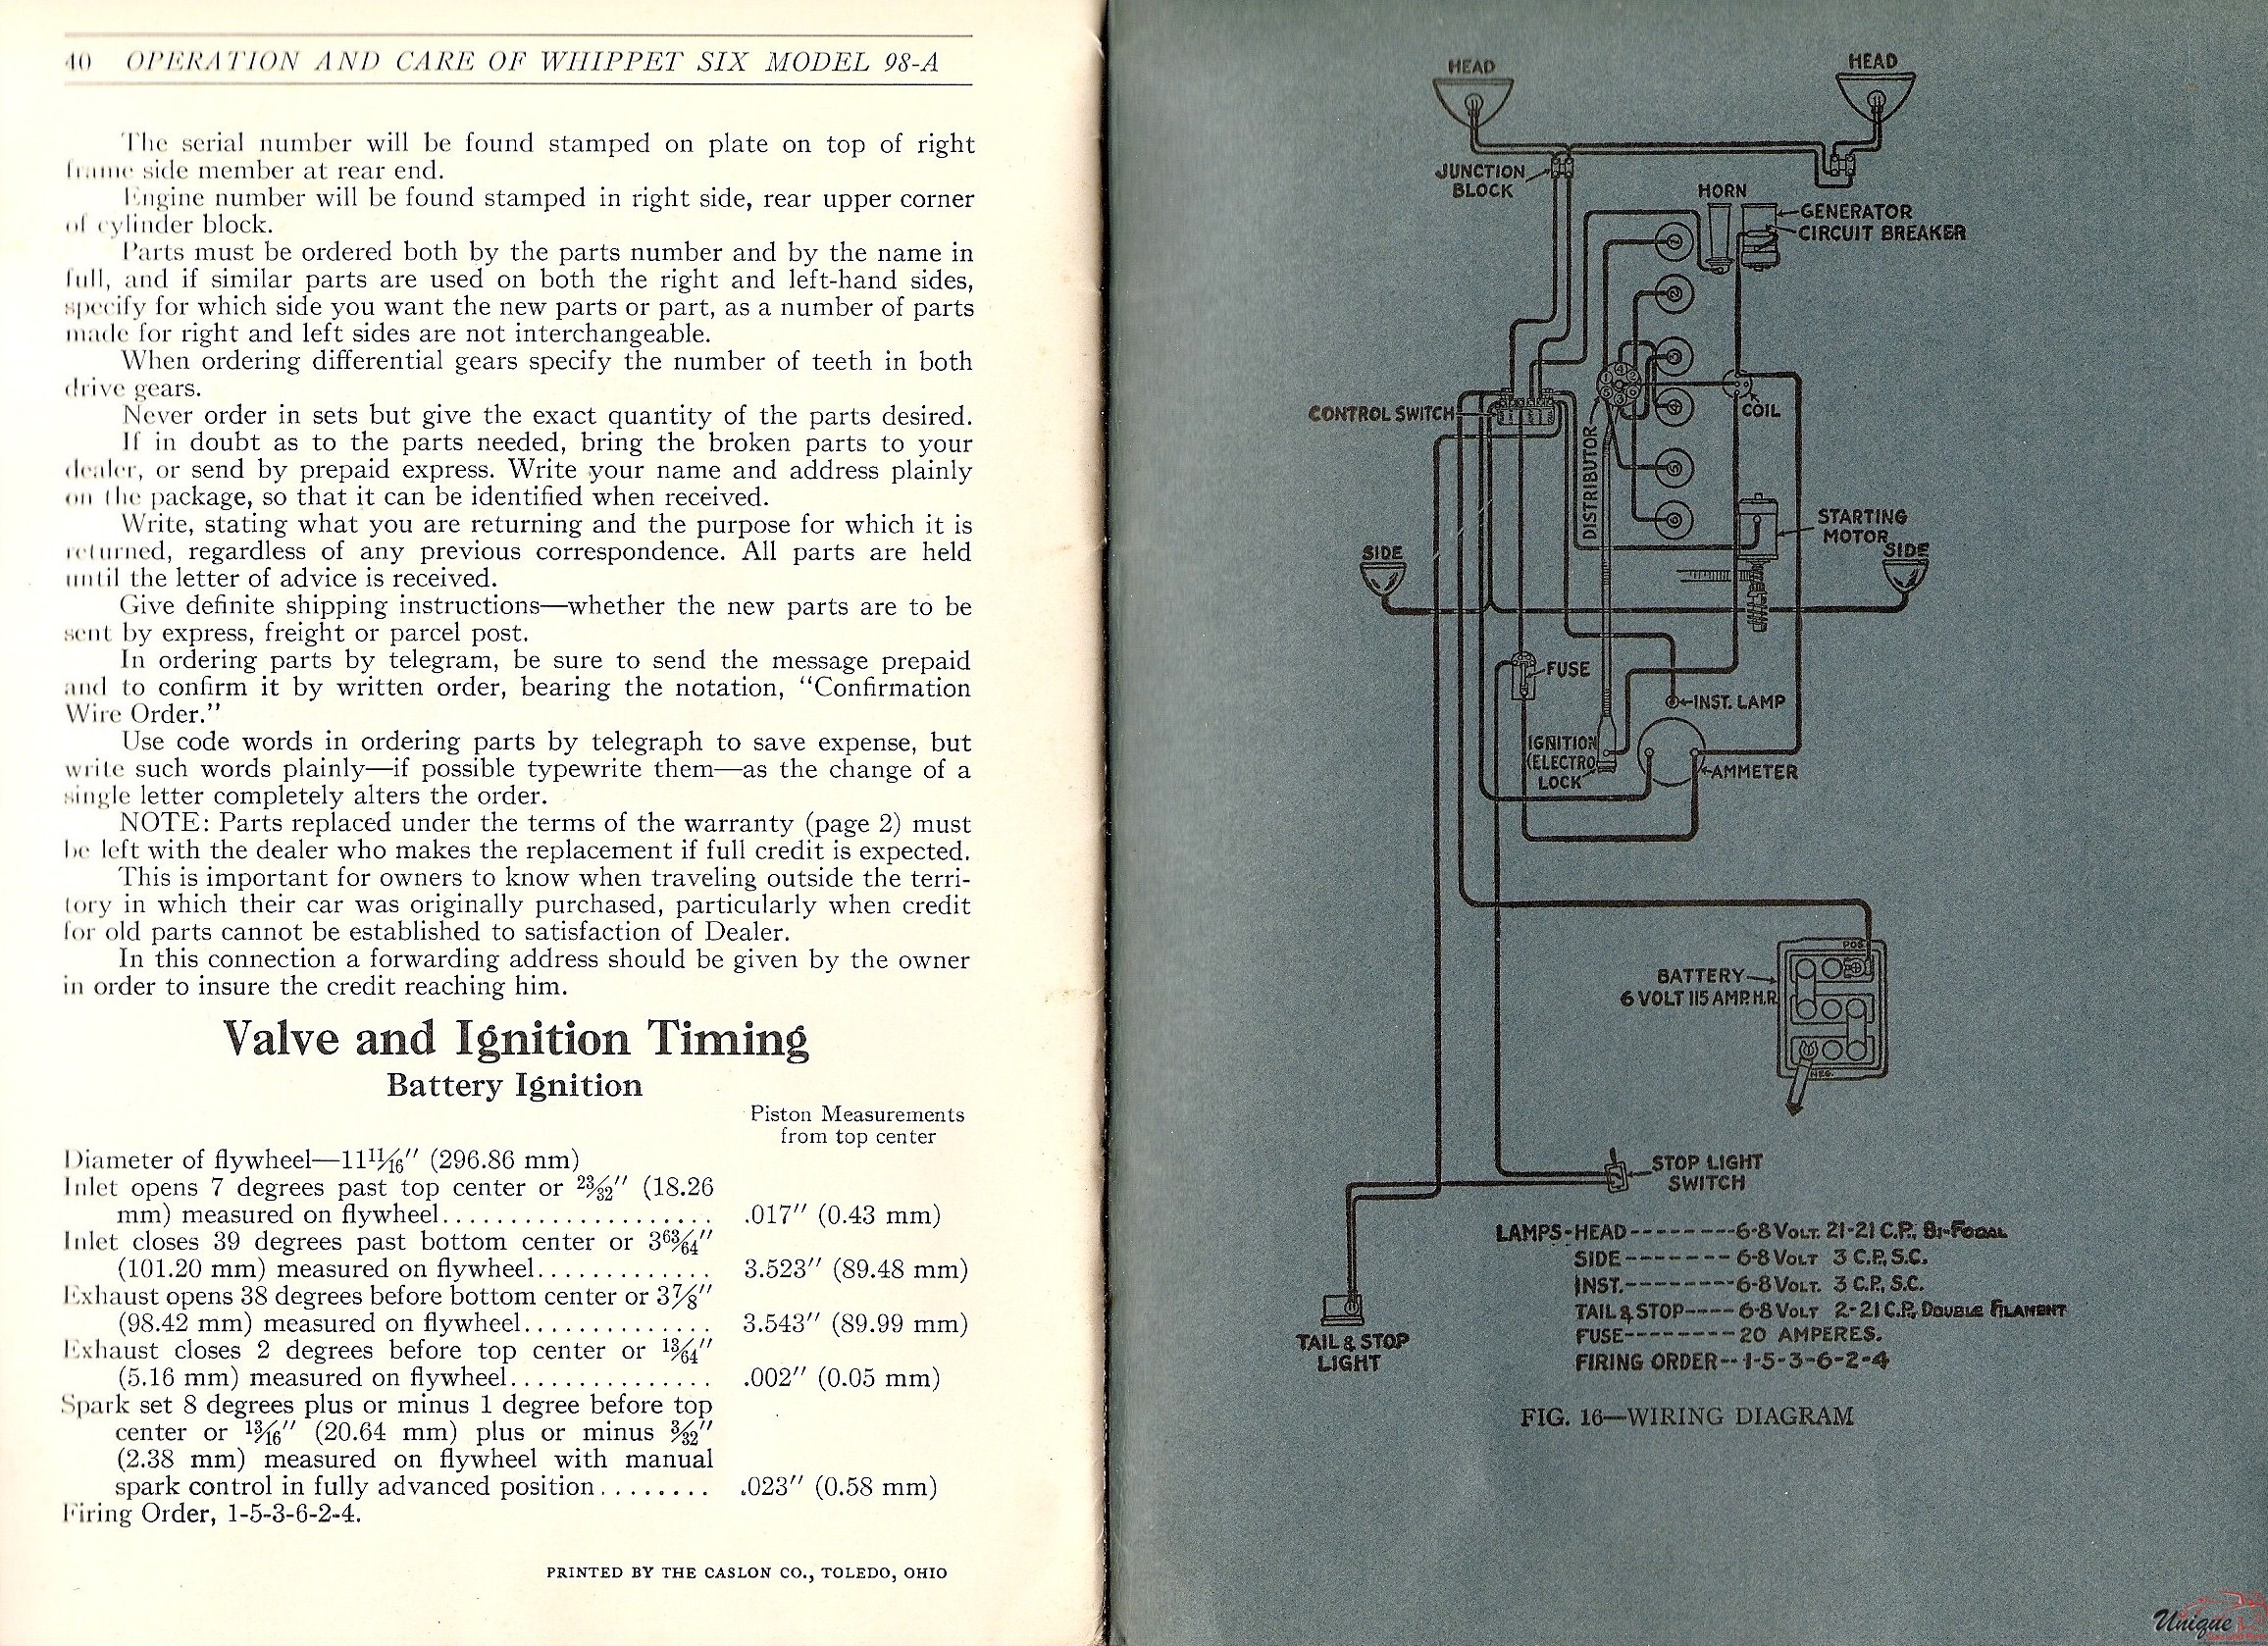 1929 Whippet Operator Manual Page 23